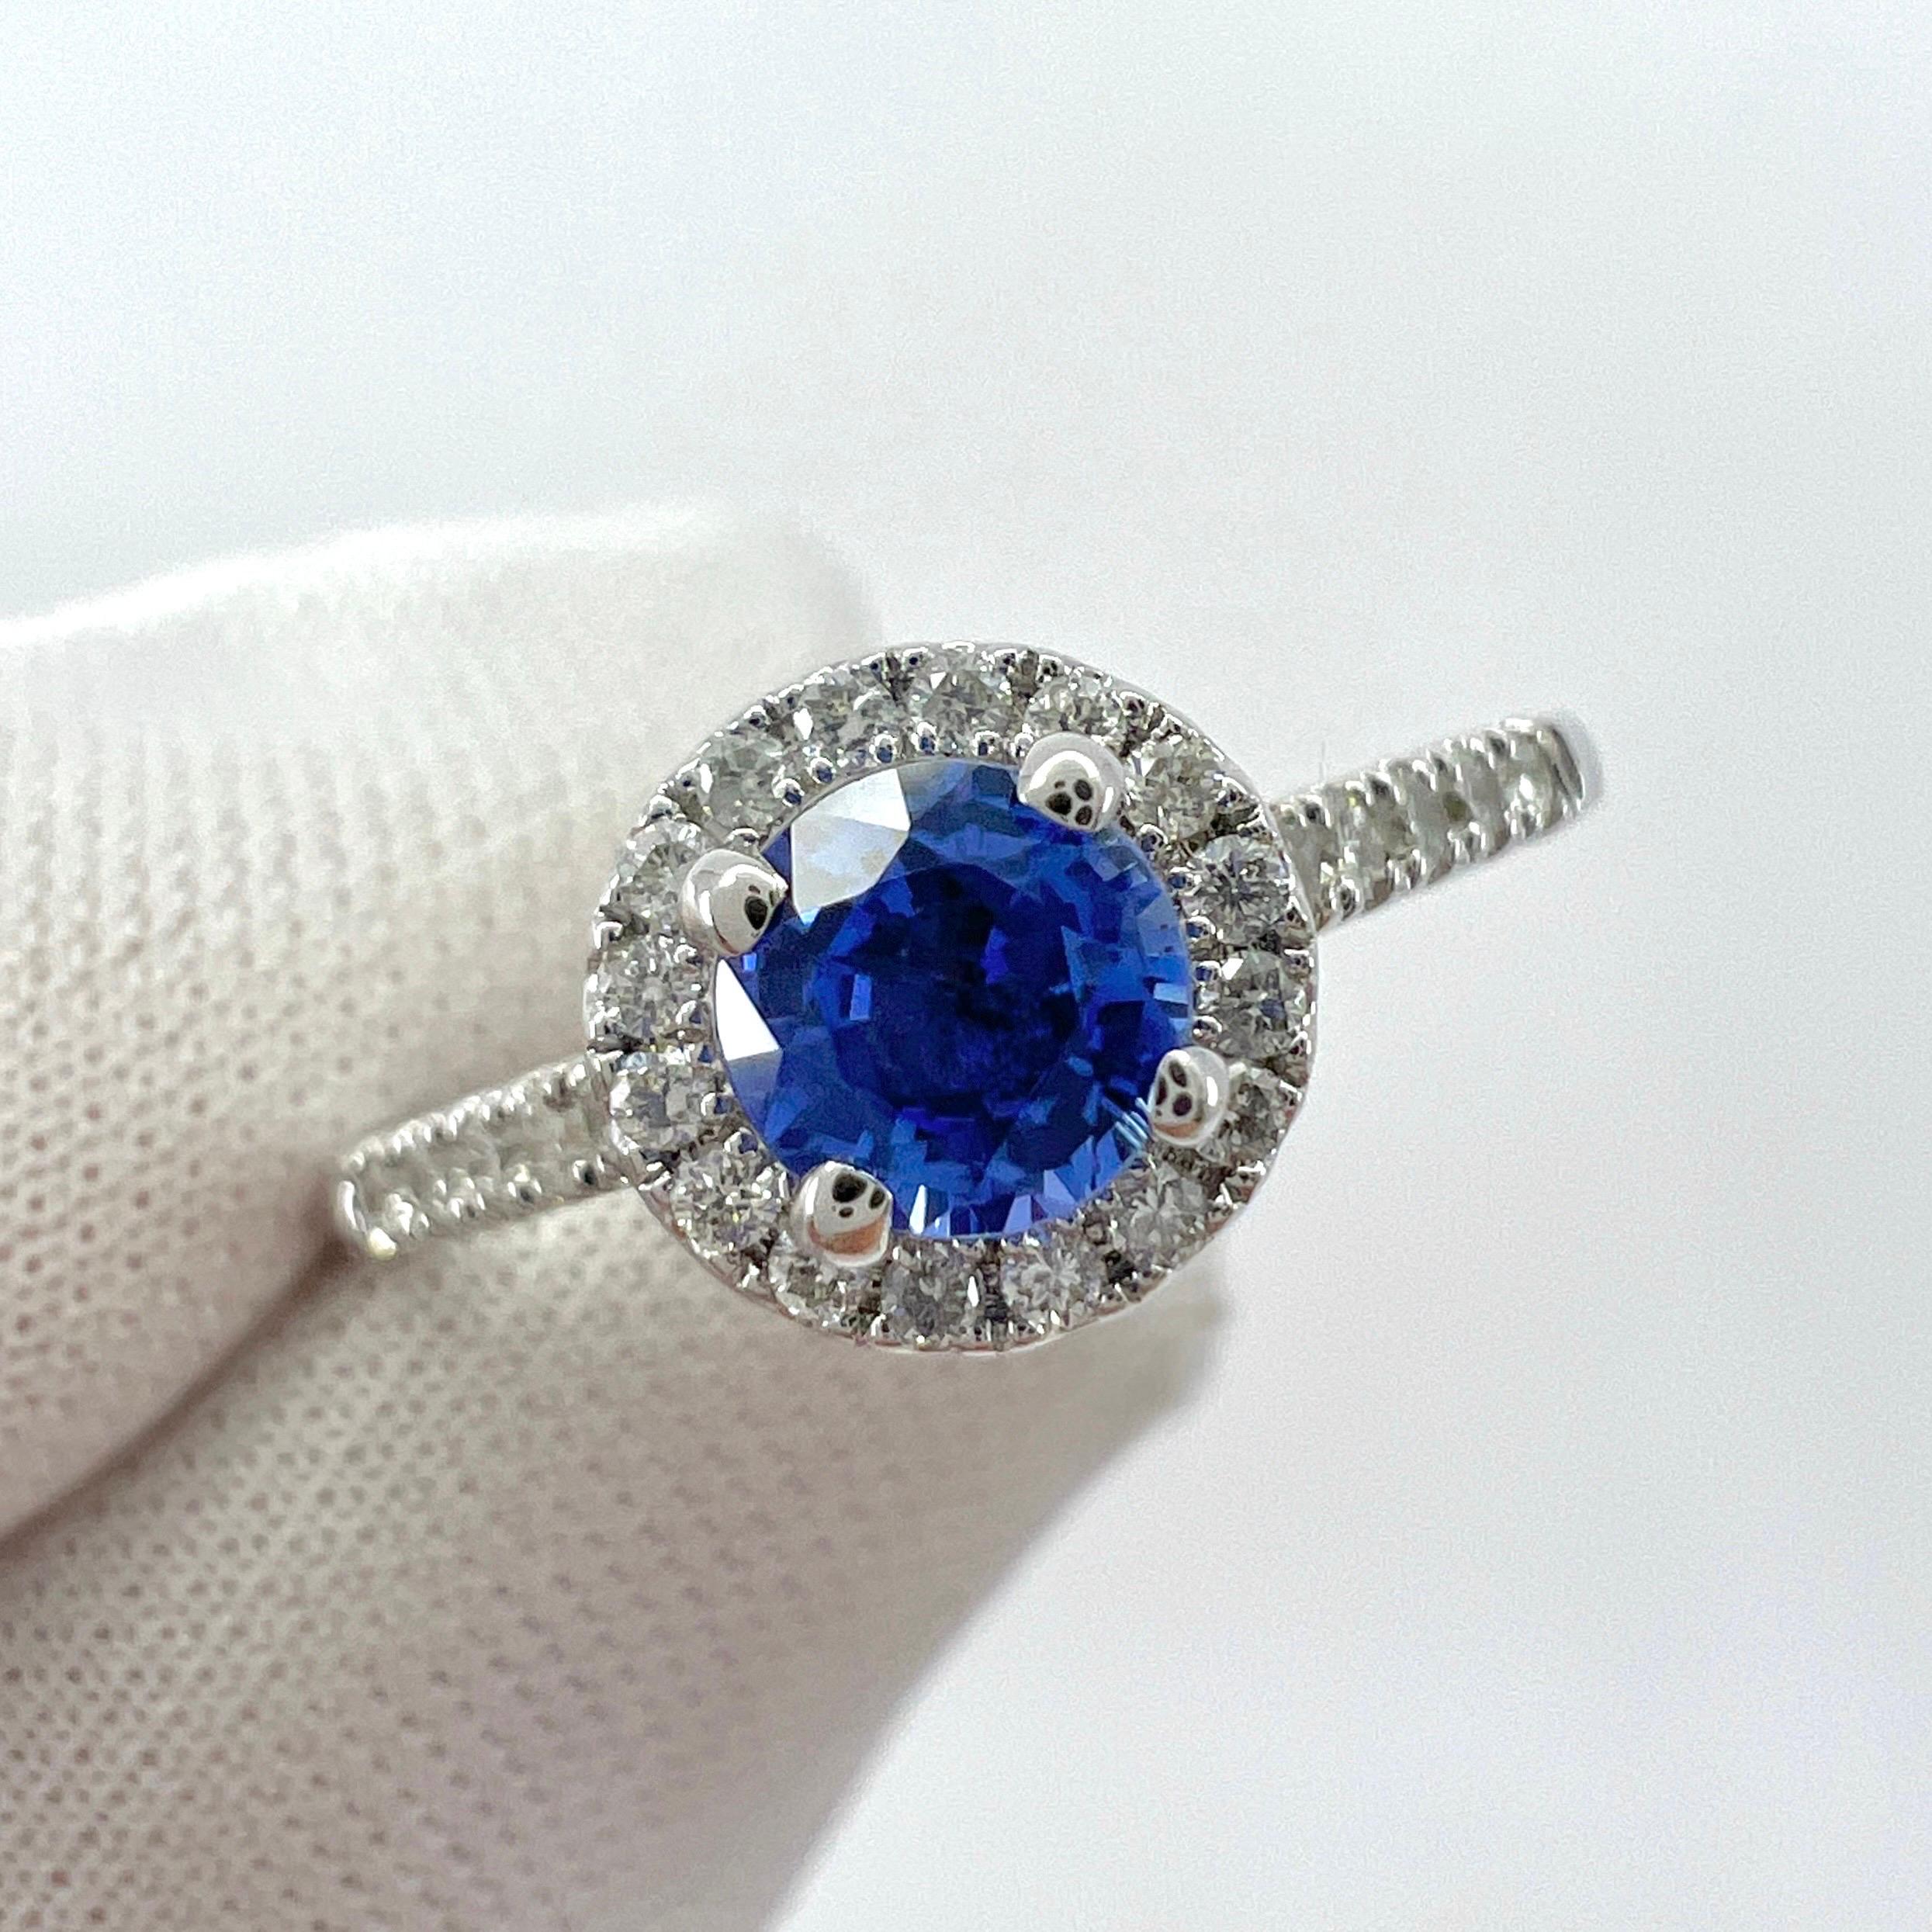 Fine Vivid Blue Round Cut Natural Ceylon Sapphire And Diamond White Gold Halo Ring.

0.75 Carat total. This ring features a beautiful vivid blue Ceylon sapphire centre stone with a fine blue colour and excellent cut and clarity. The sapphire